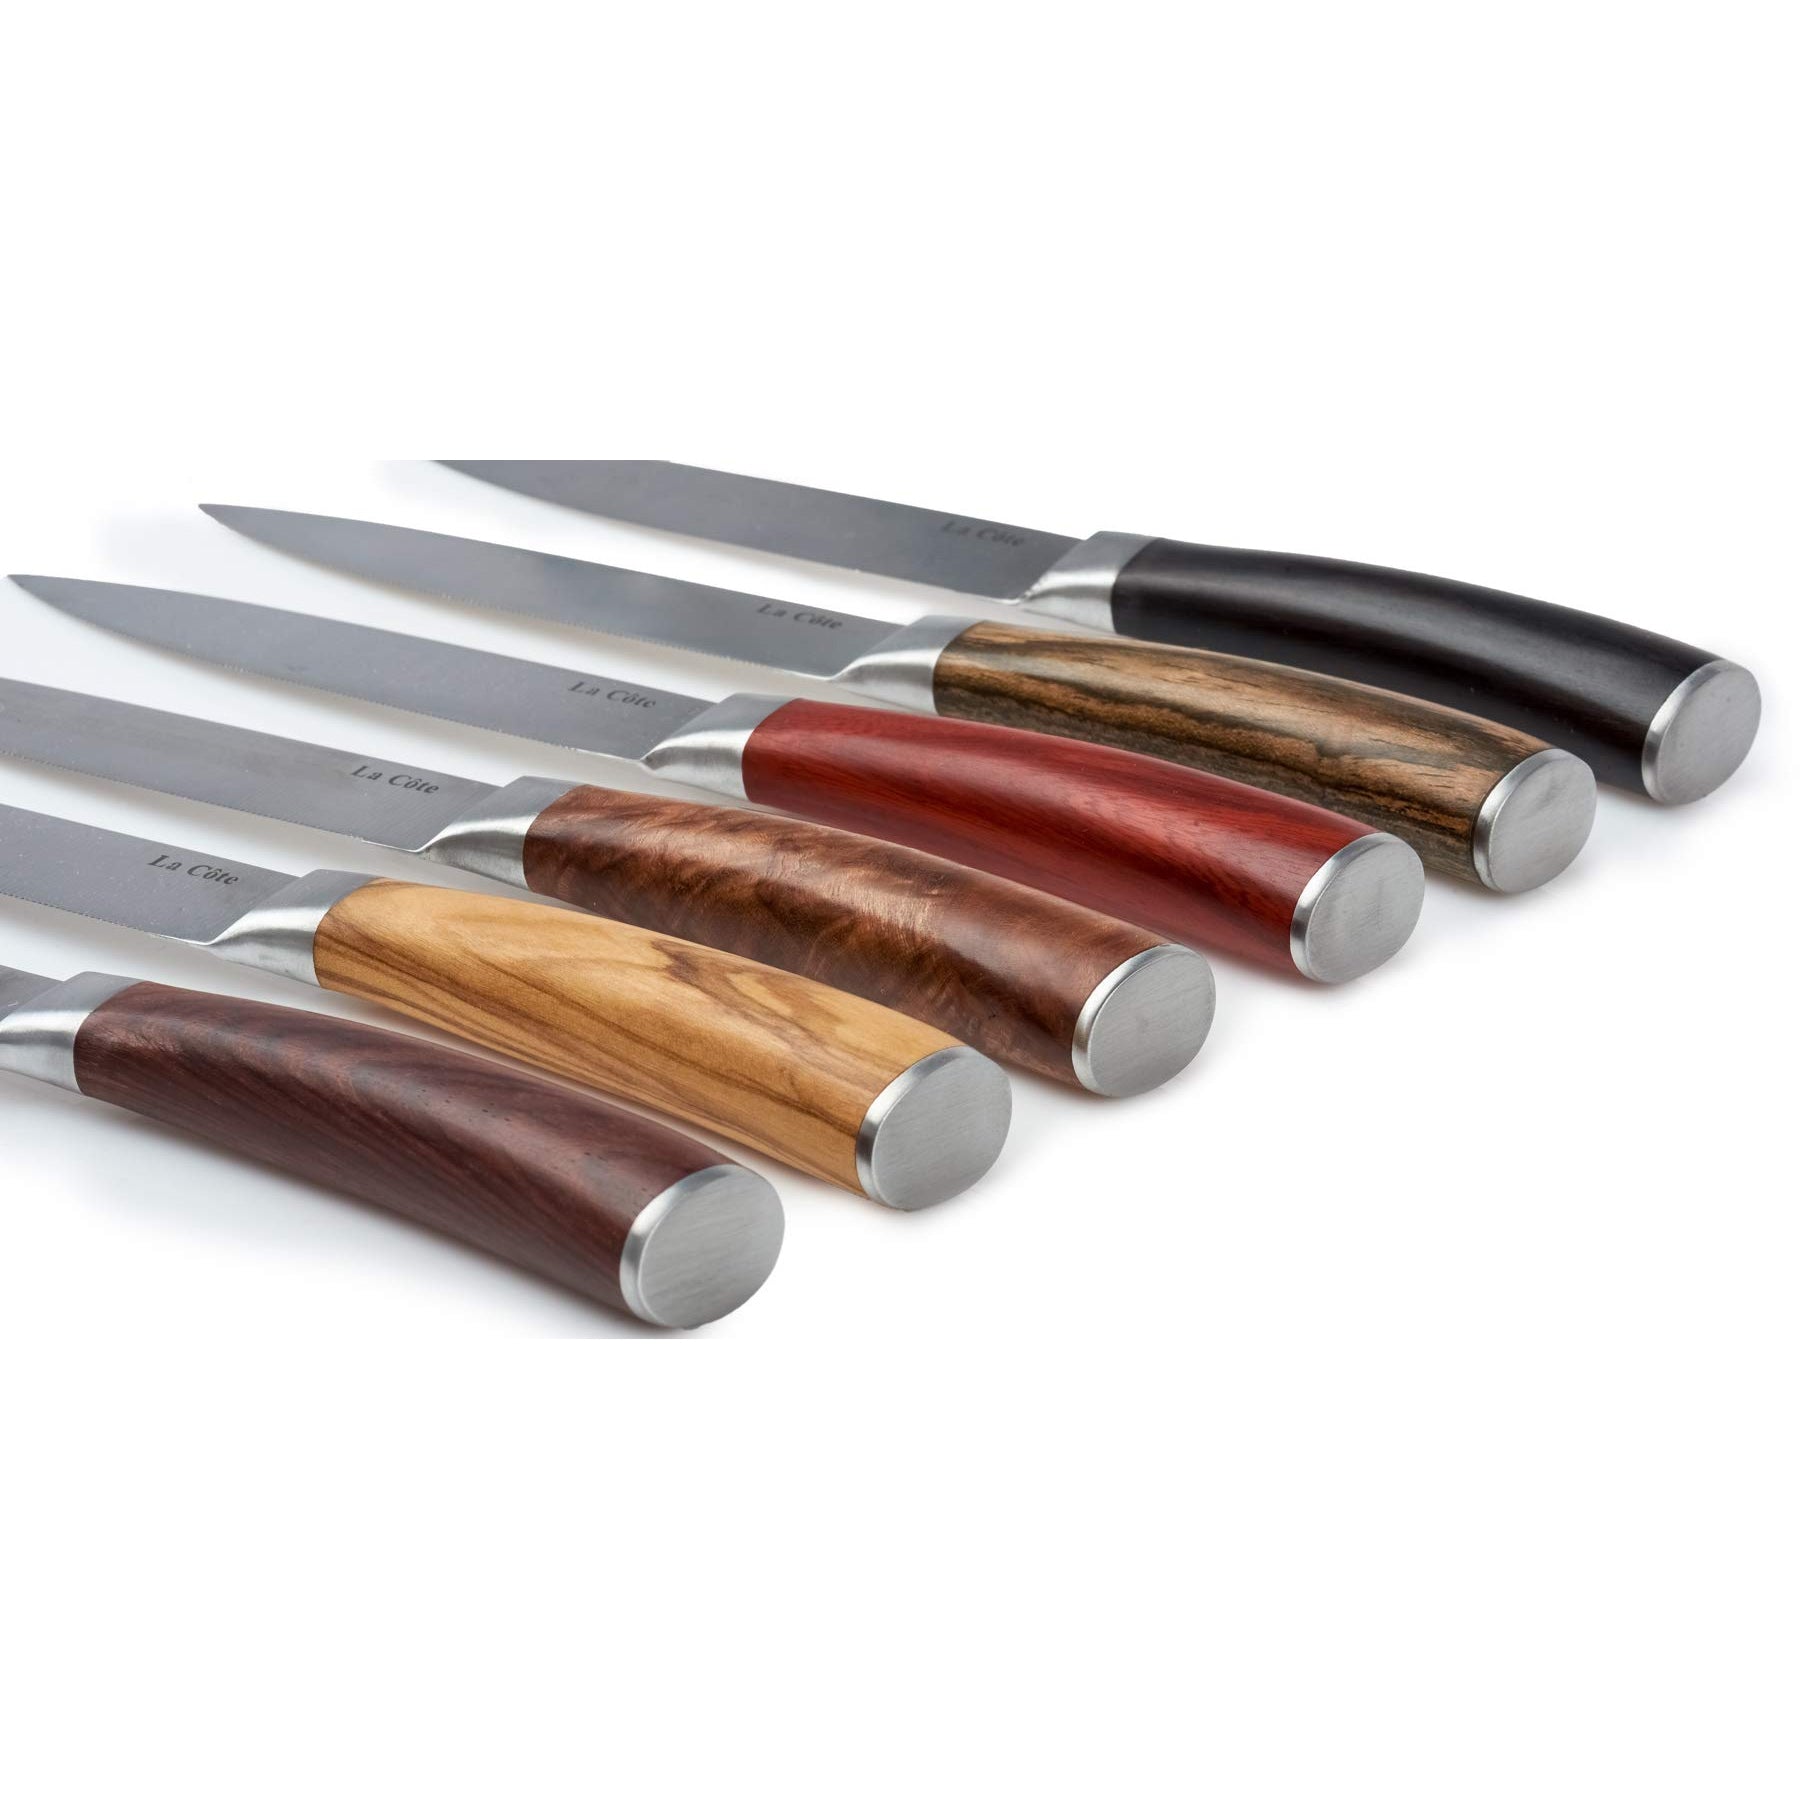 6 Piece Steak Knives Set Japanese Stainless Steel (With Gift Box)